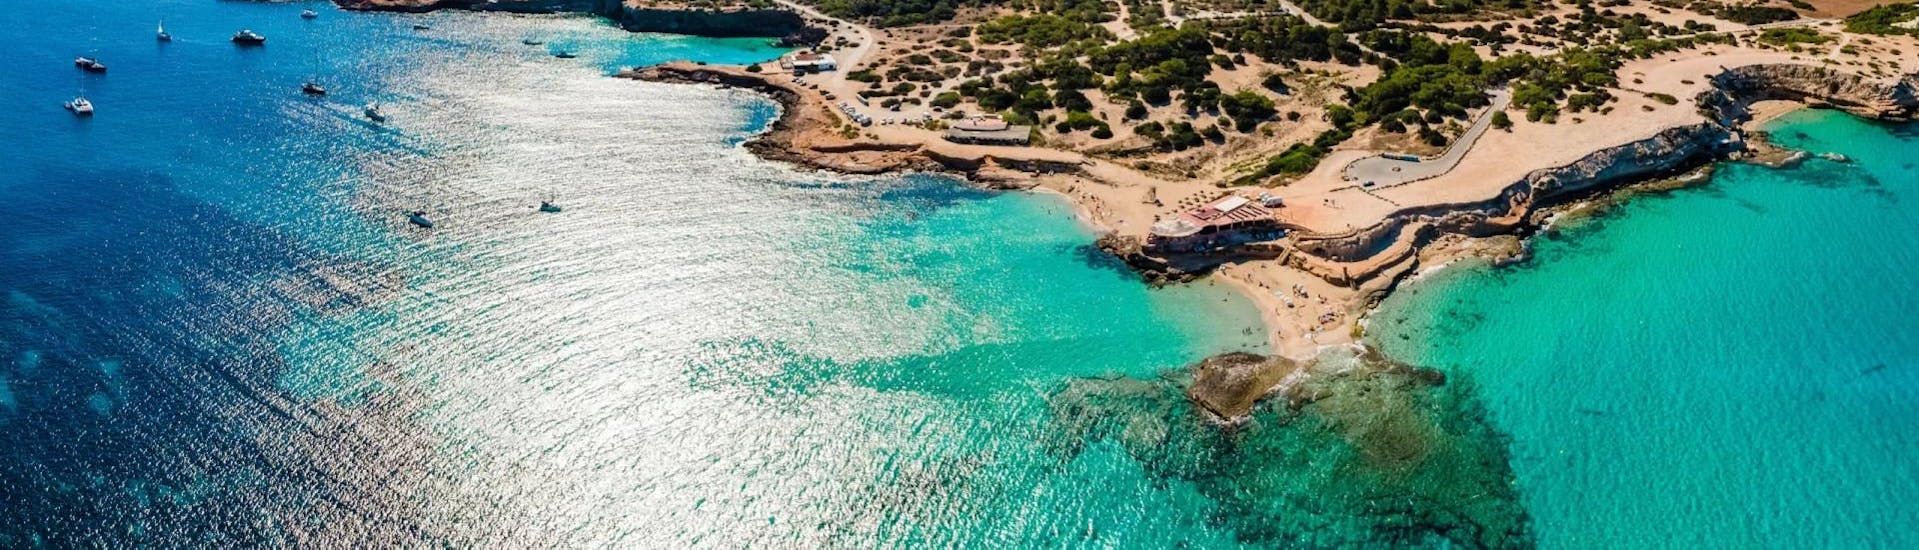 Picture of the landscape of the coast of Ibiza during boat tours or diving by Arenal Diving & Boat Tours Ibiza.